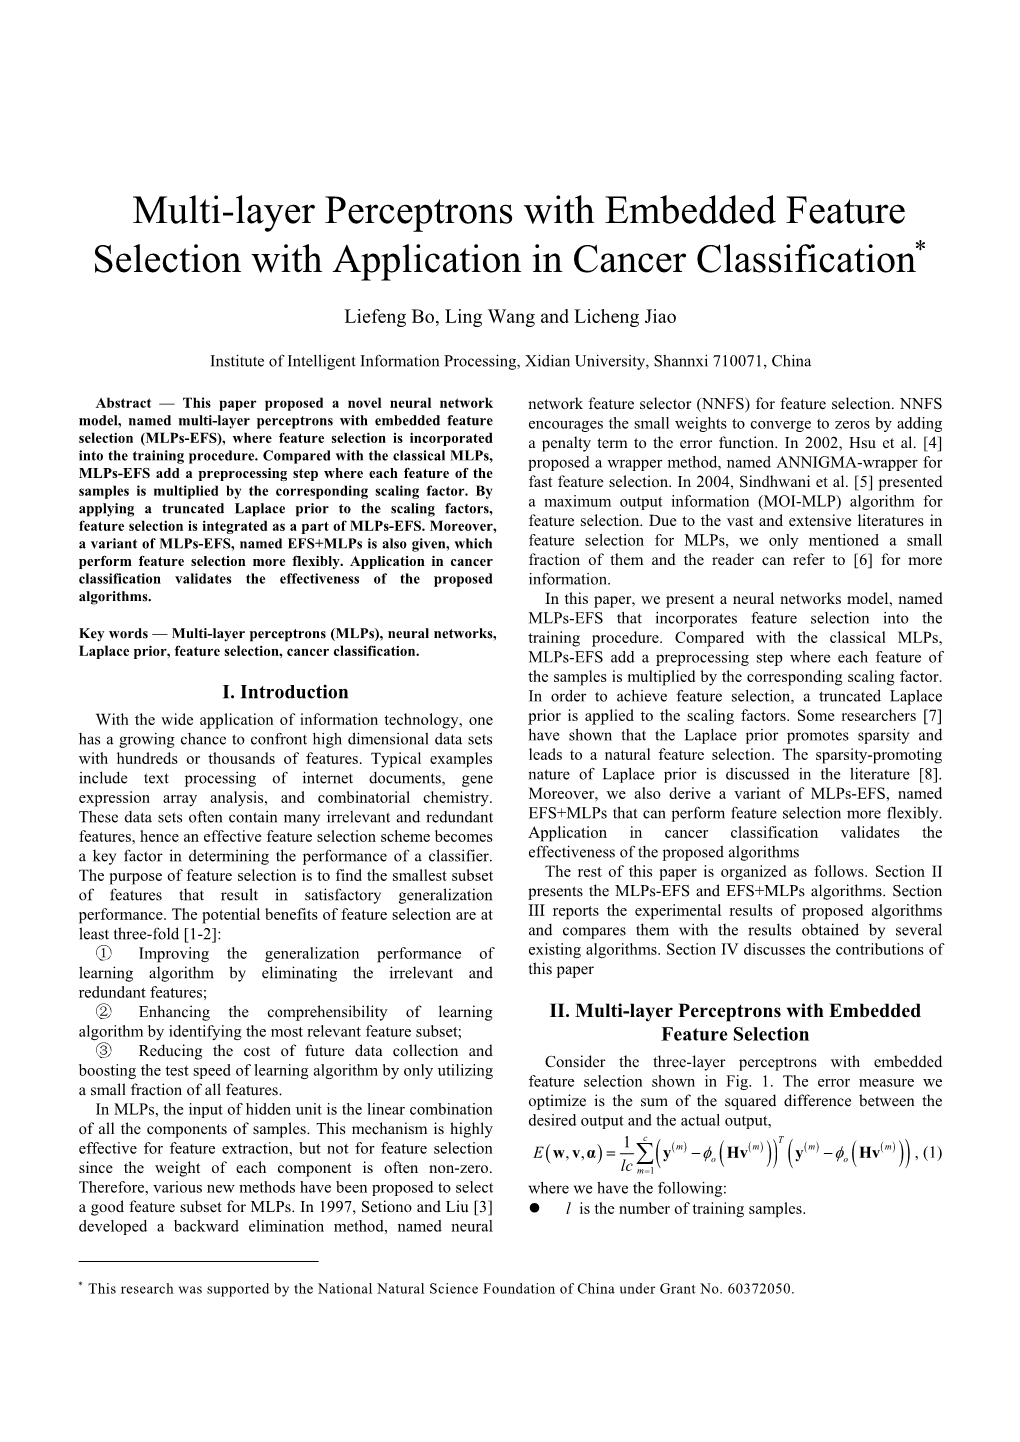 Multi-Layer Perceptrons with Embedded Feature Selection with Application in Cancer Classification∗